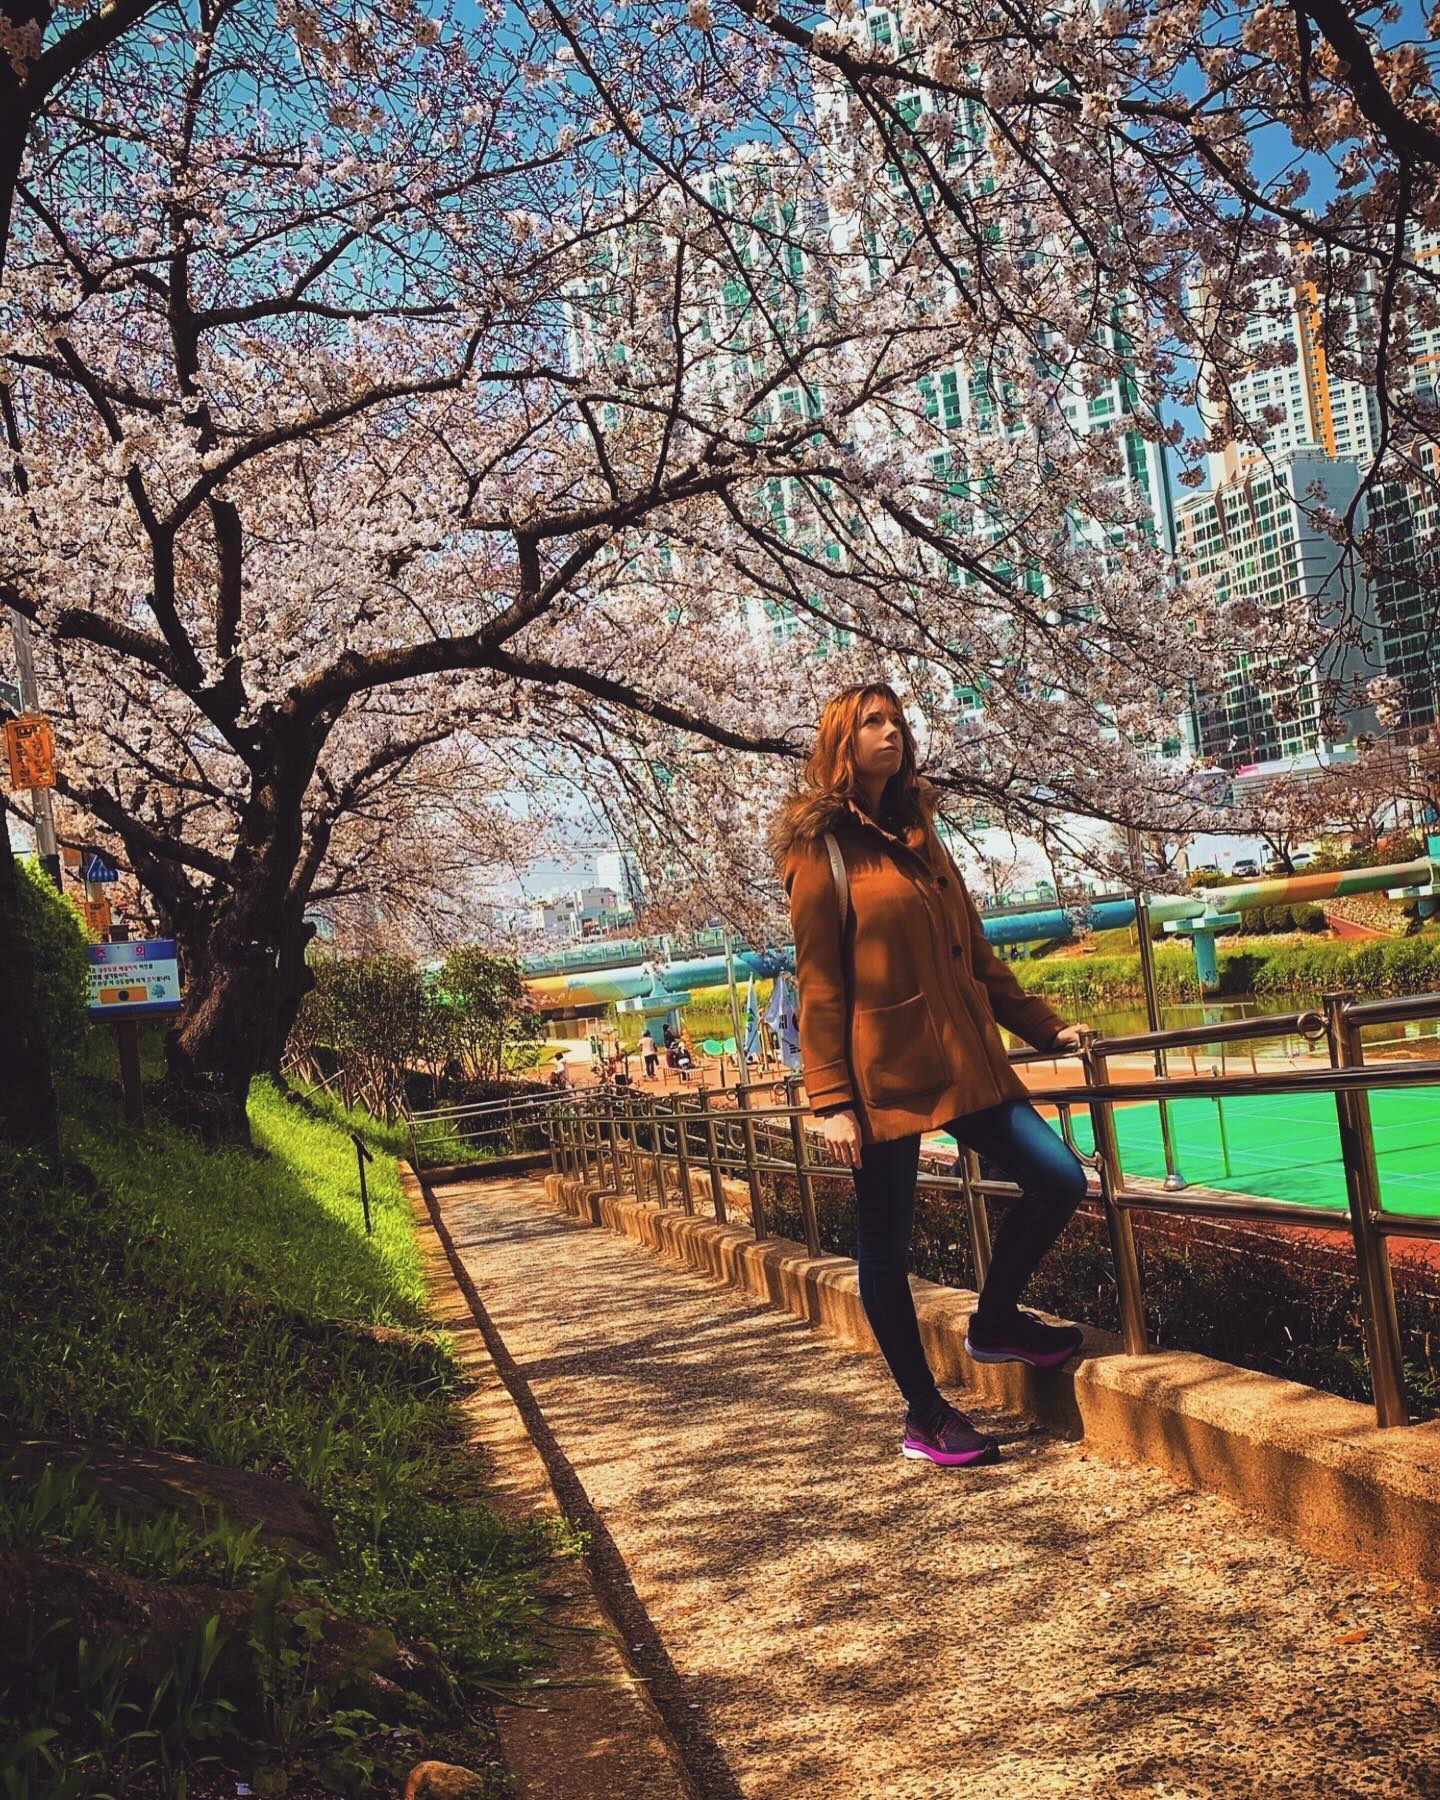 Do you want to live in ur country forever? 🥰 #travel #southkorea #spring #blogger #backpacker #adventure #lifegoals #lifestyle #homesweethome